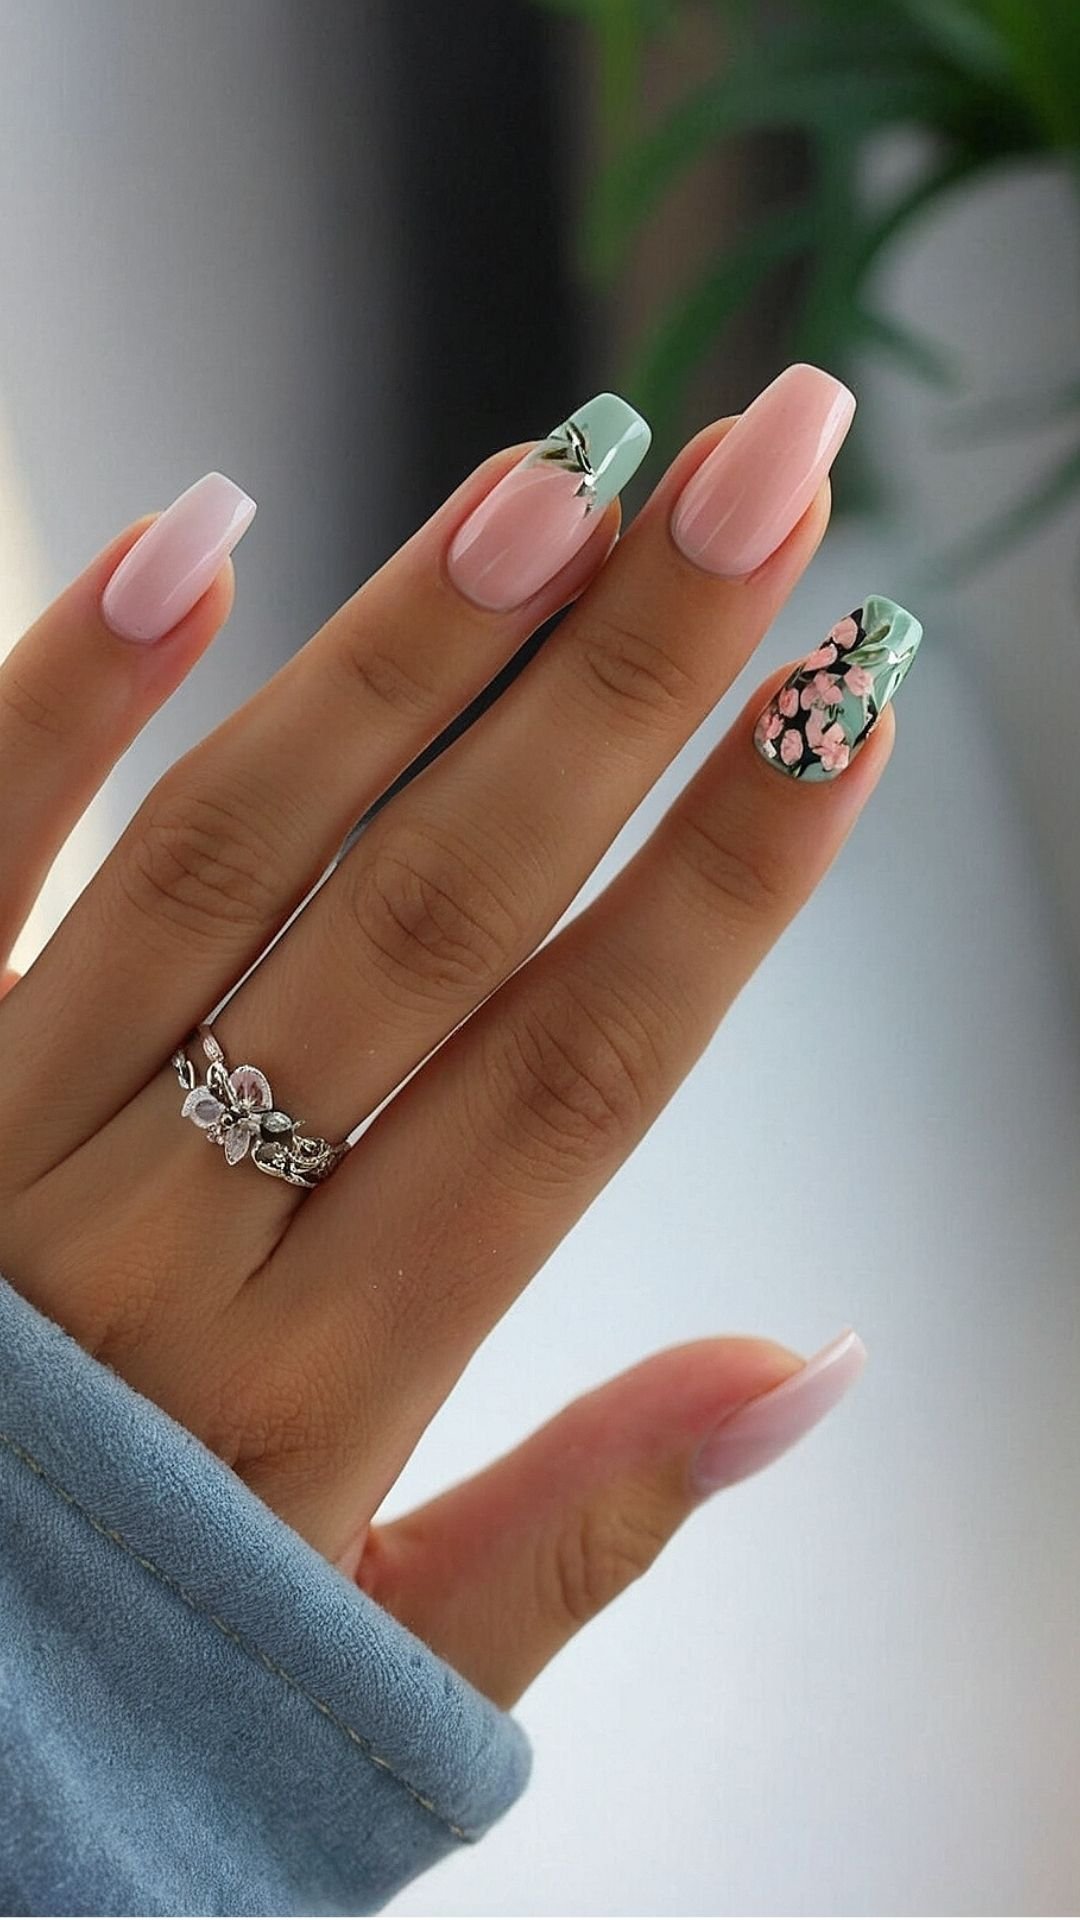 Minty Fresh Floral Manicure